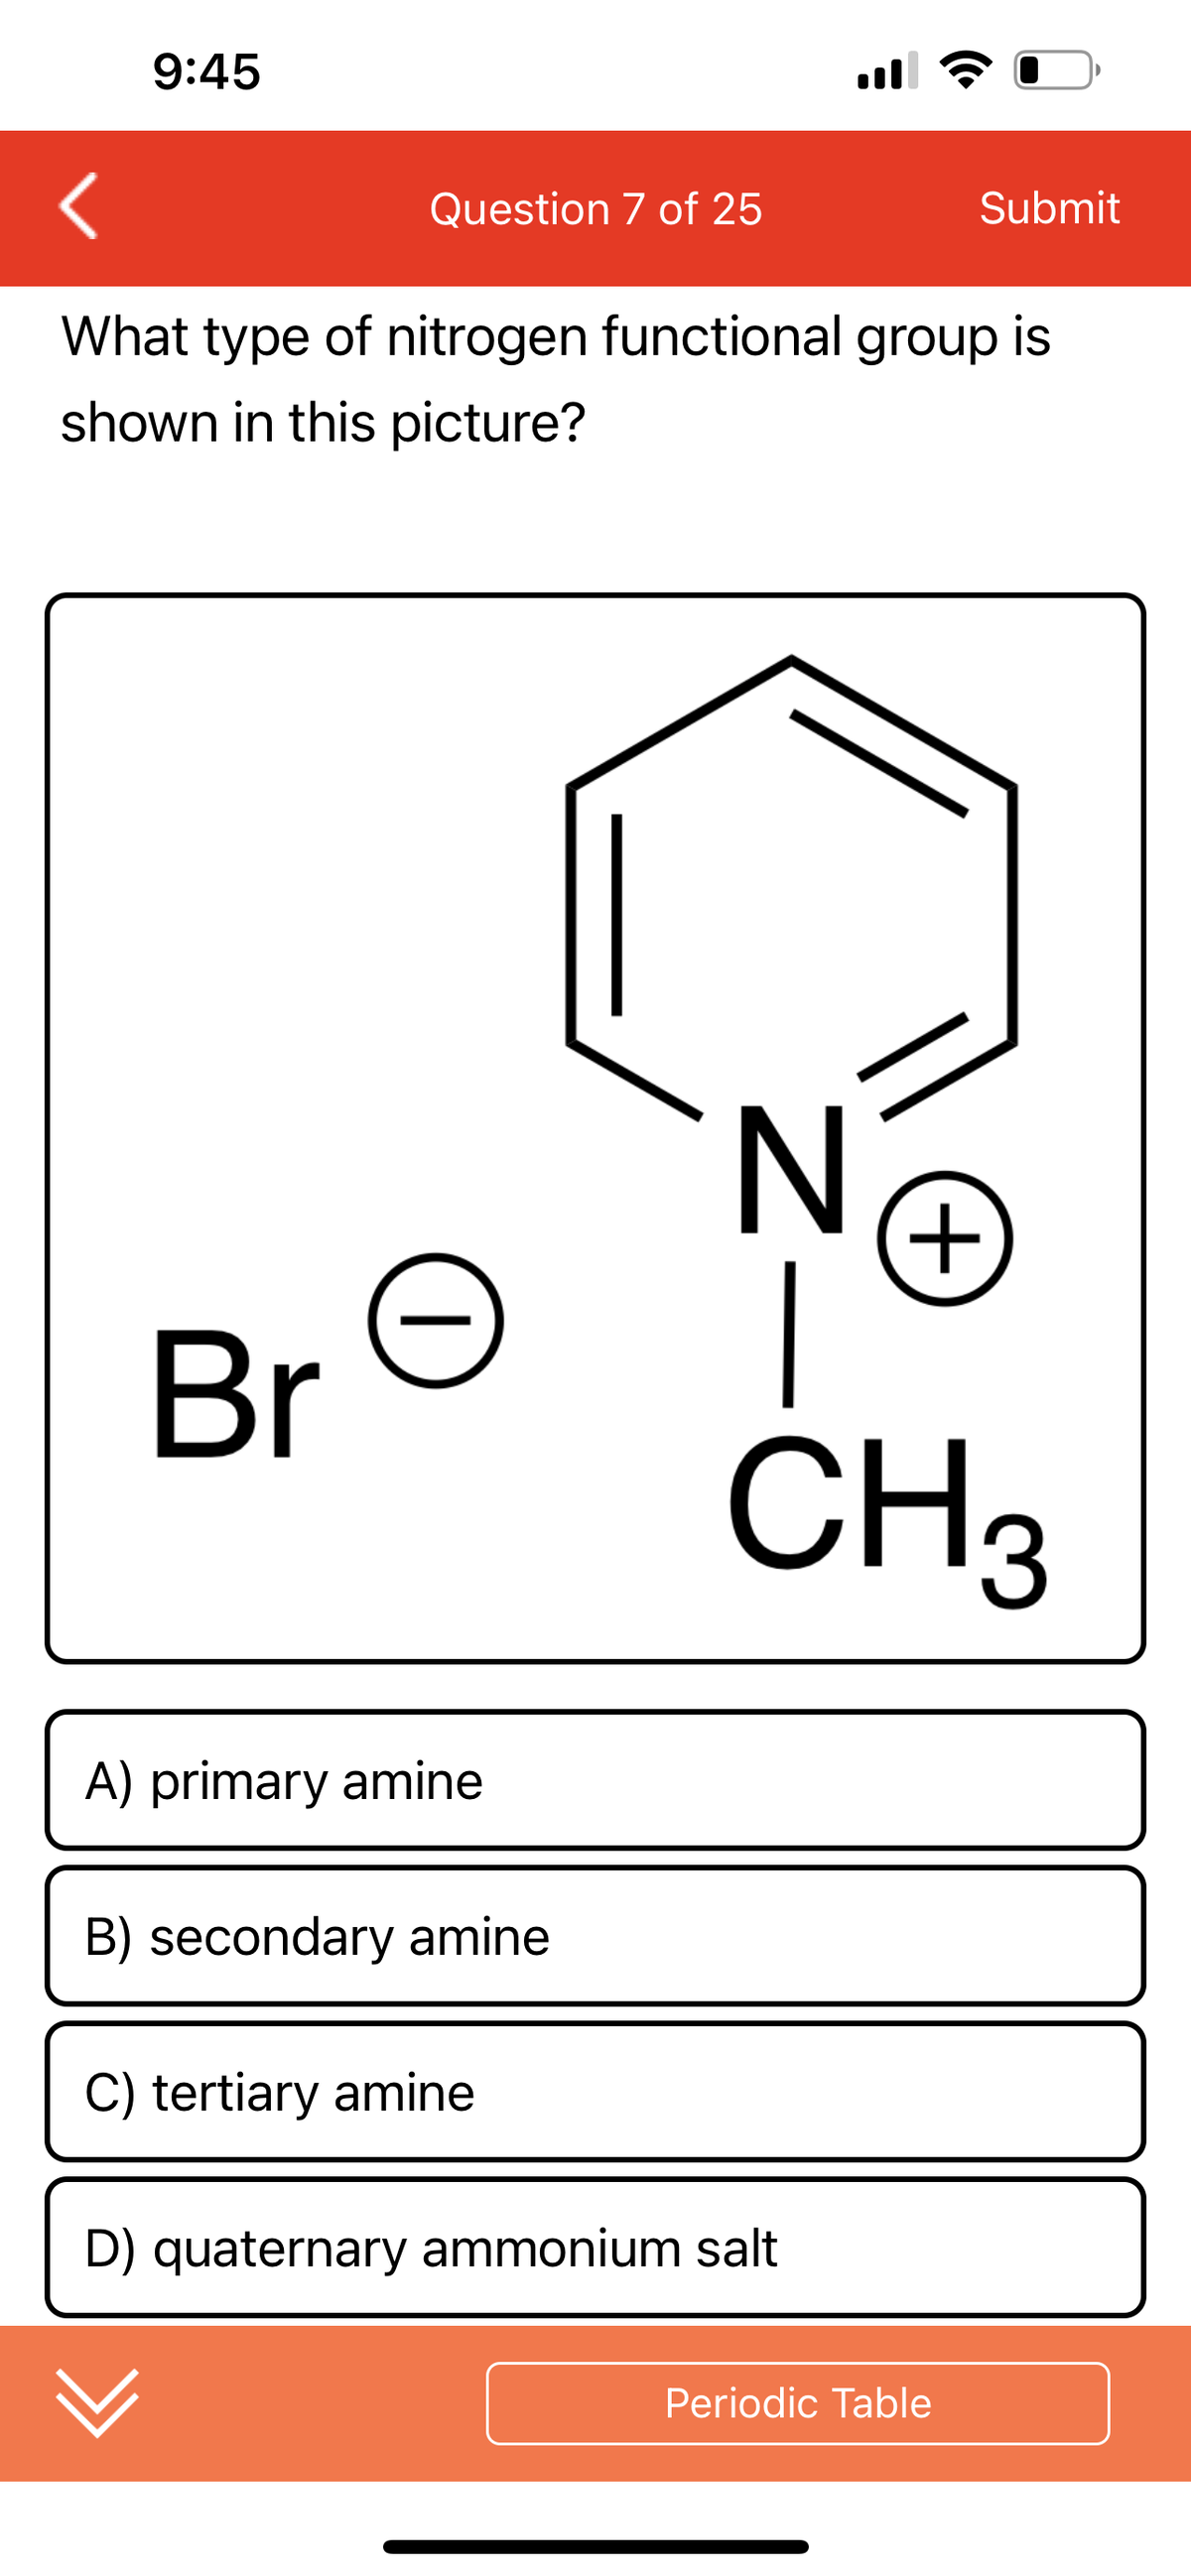 9:45
Question 7 of 25
Br
What type of nitrogen functional group is
shown in this picture?
|
A) primary amine
B) secondary amine
C) tertiary amine
N
Submit
D) quaternary ammonium salt
+
CH3
Periodic Table